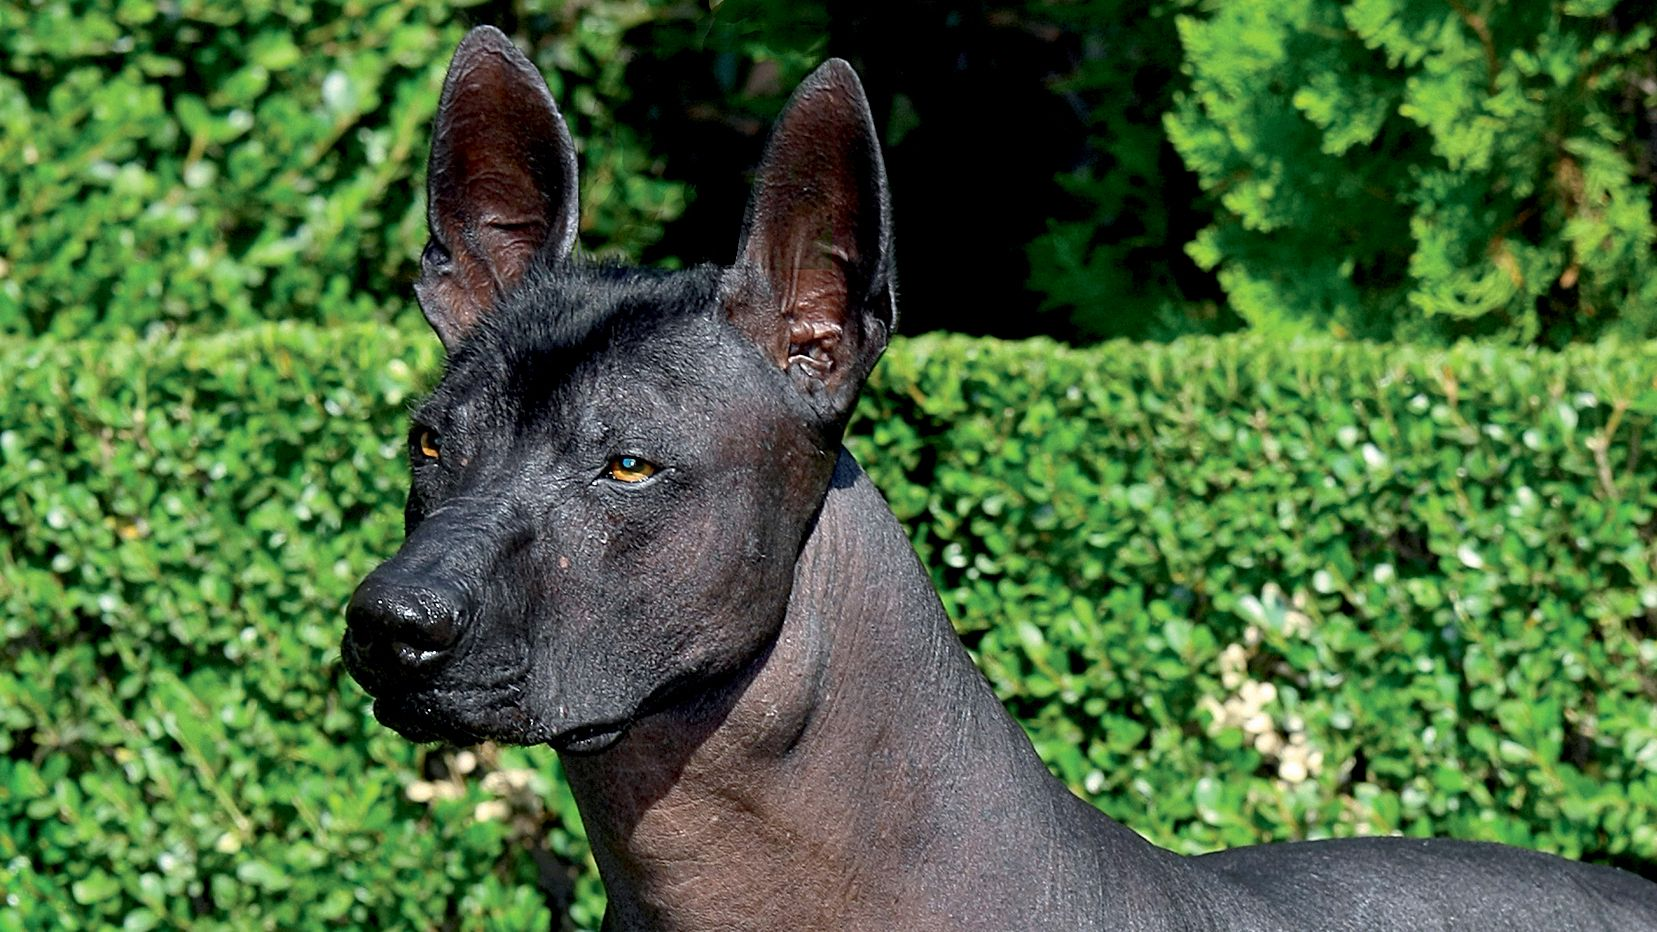 Close-up of a Xoloitzcuintli in front of a hedge